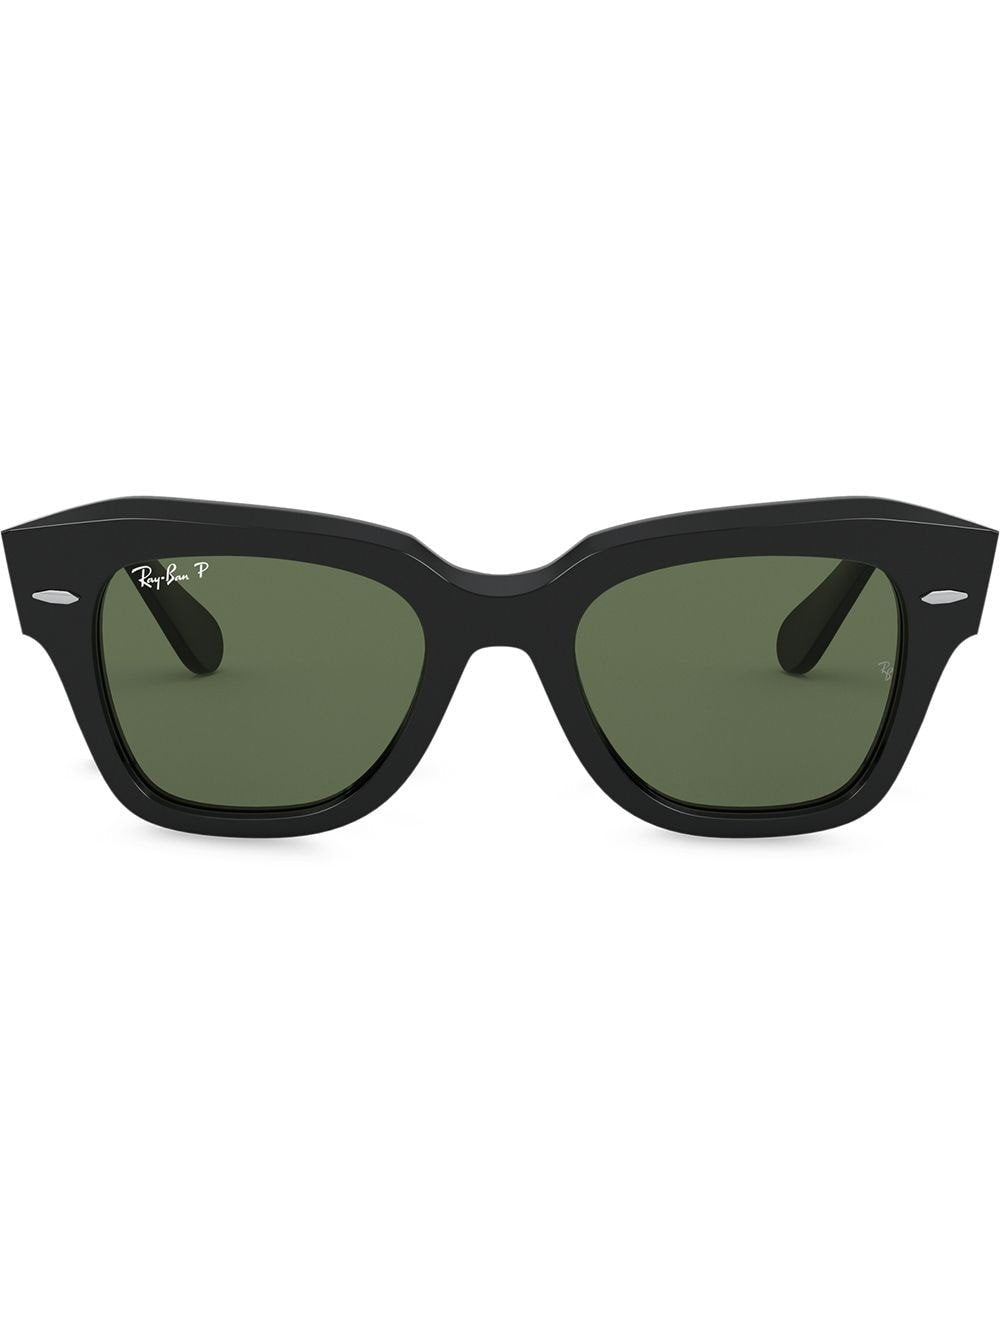 RAY-BAN RB2186 Acetate Sunglasses - André Opticas